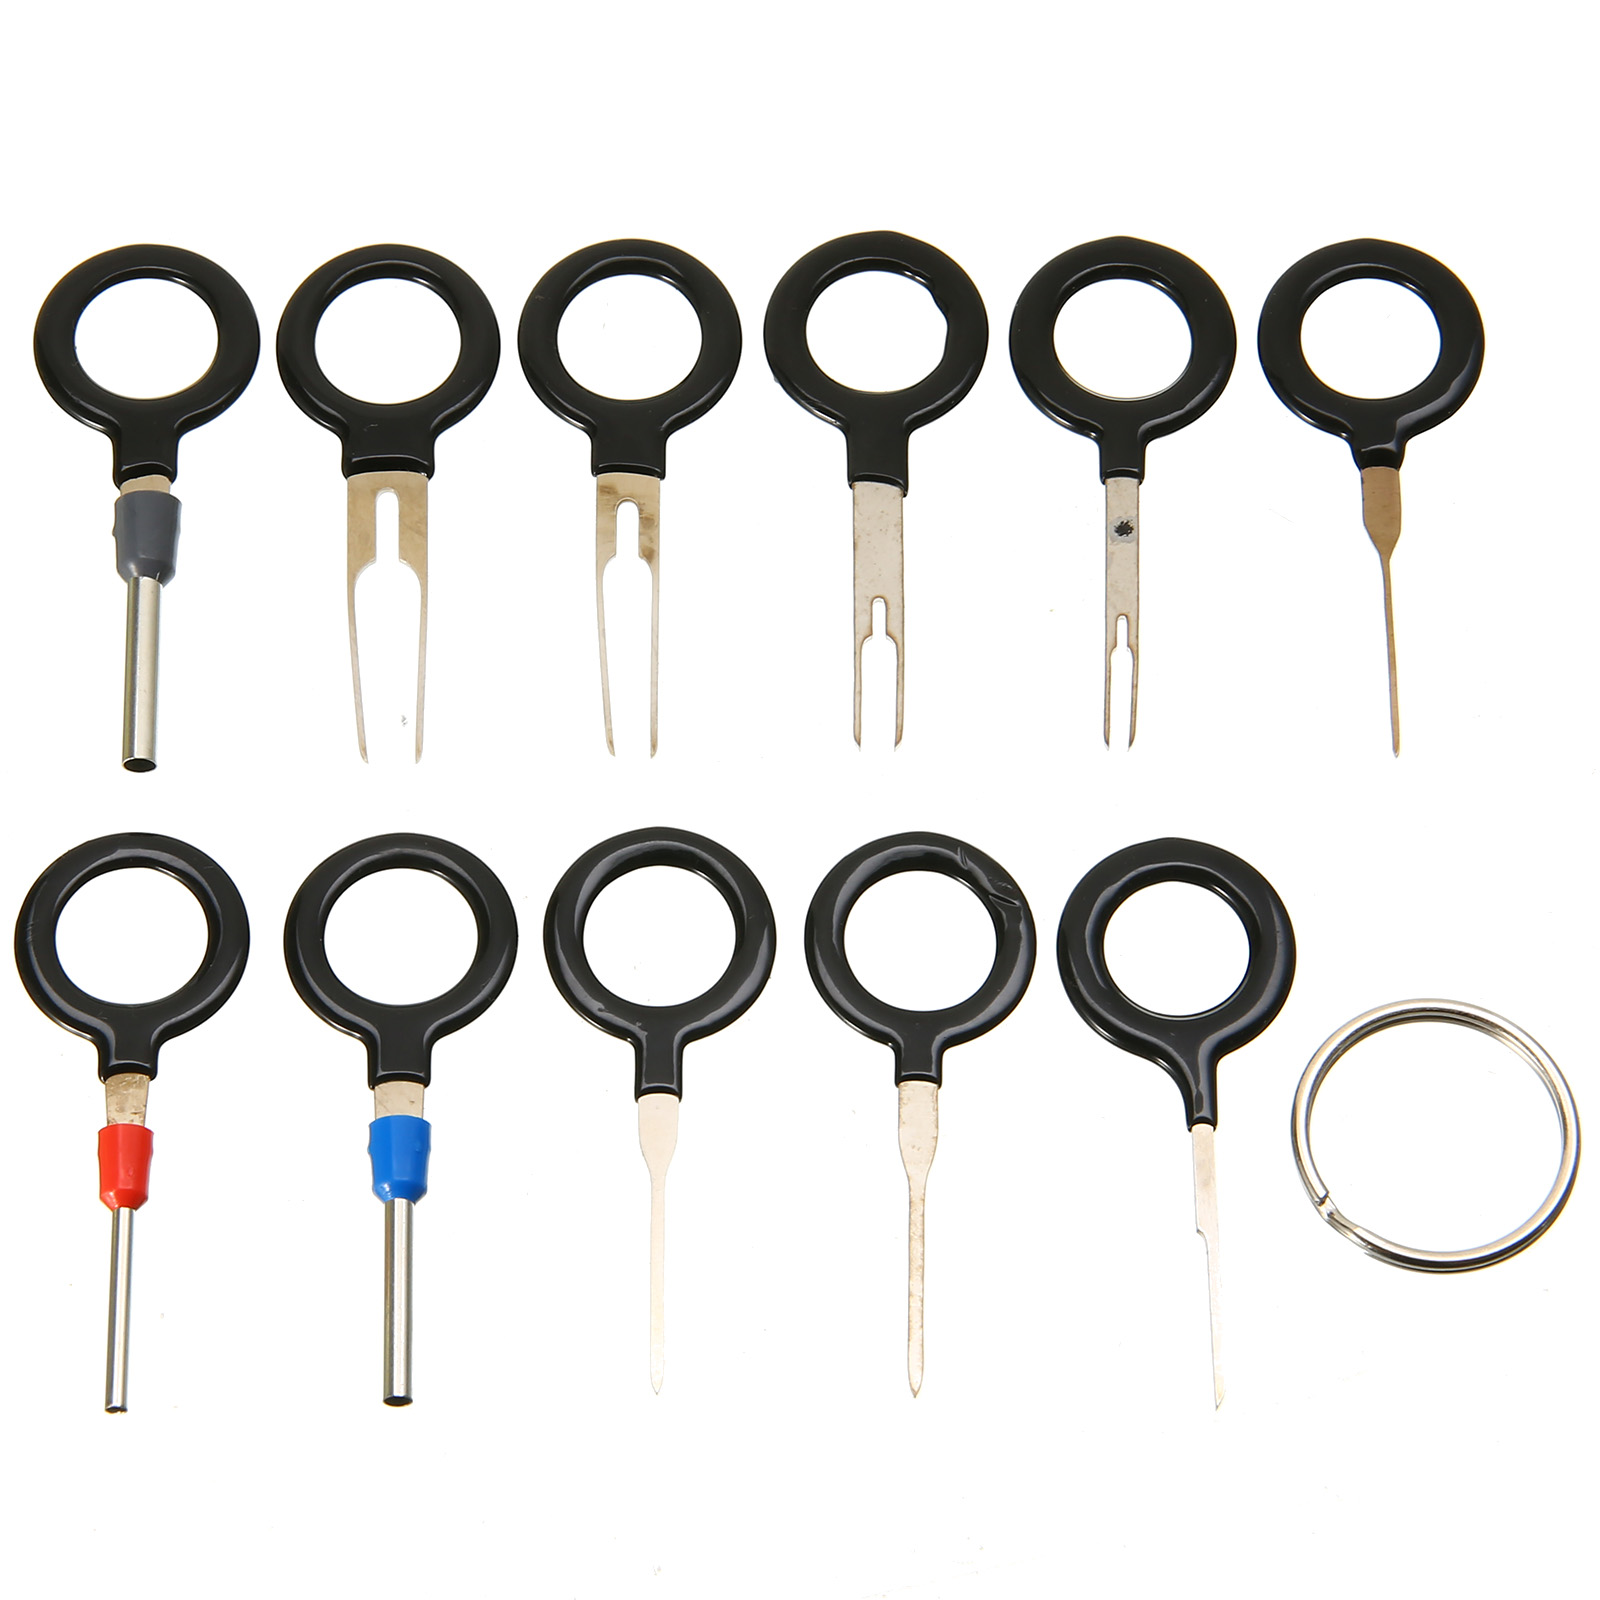 11pcs/set Terminal Removal Tool Key Pin Wire Crimp Connector Pin Extractor Kit Car Electrical Key Tools